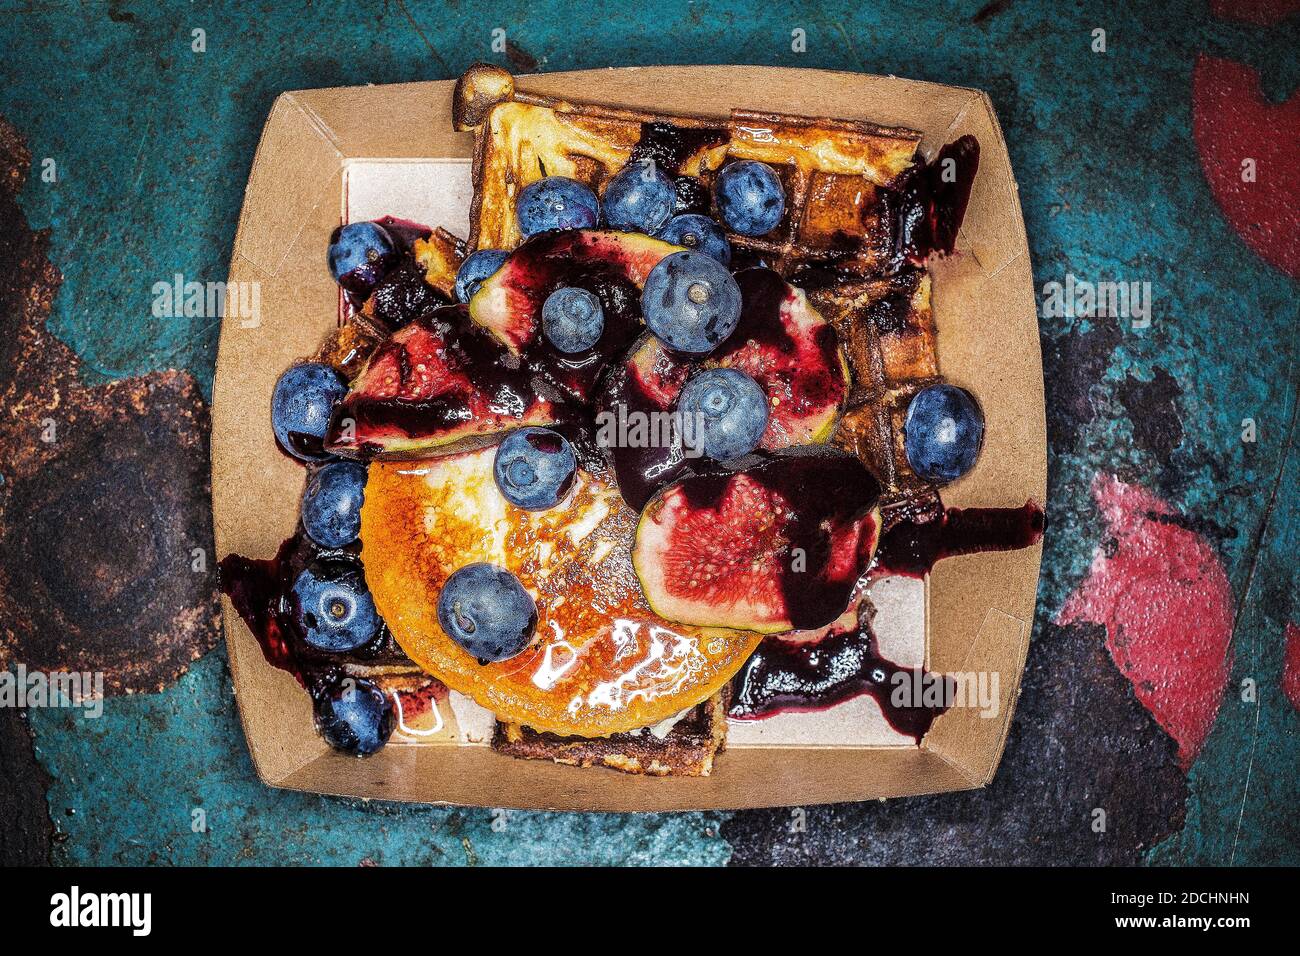 Waffles with figs and blueberries at Maltby Street Market, London, UK Stock Photo